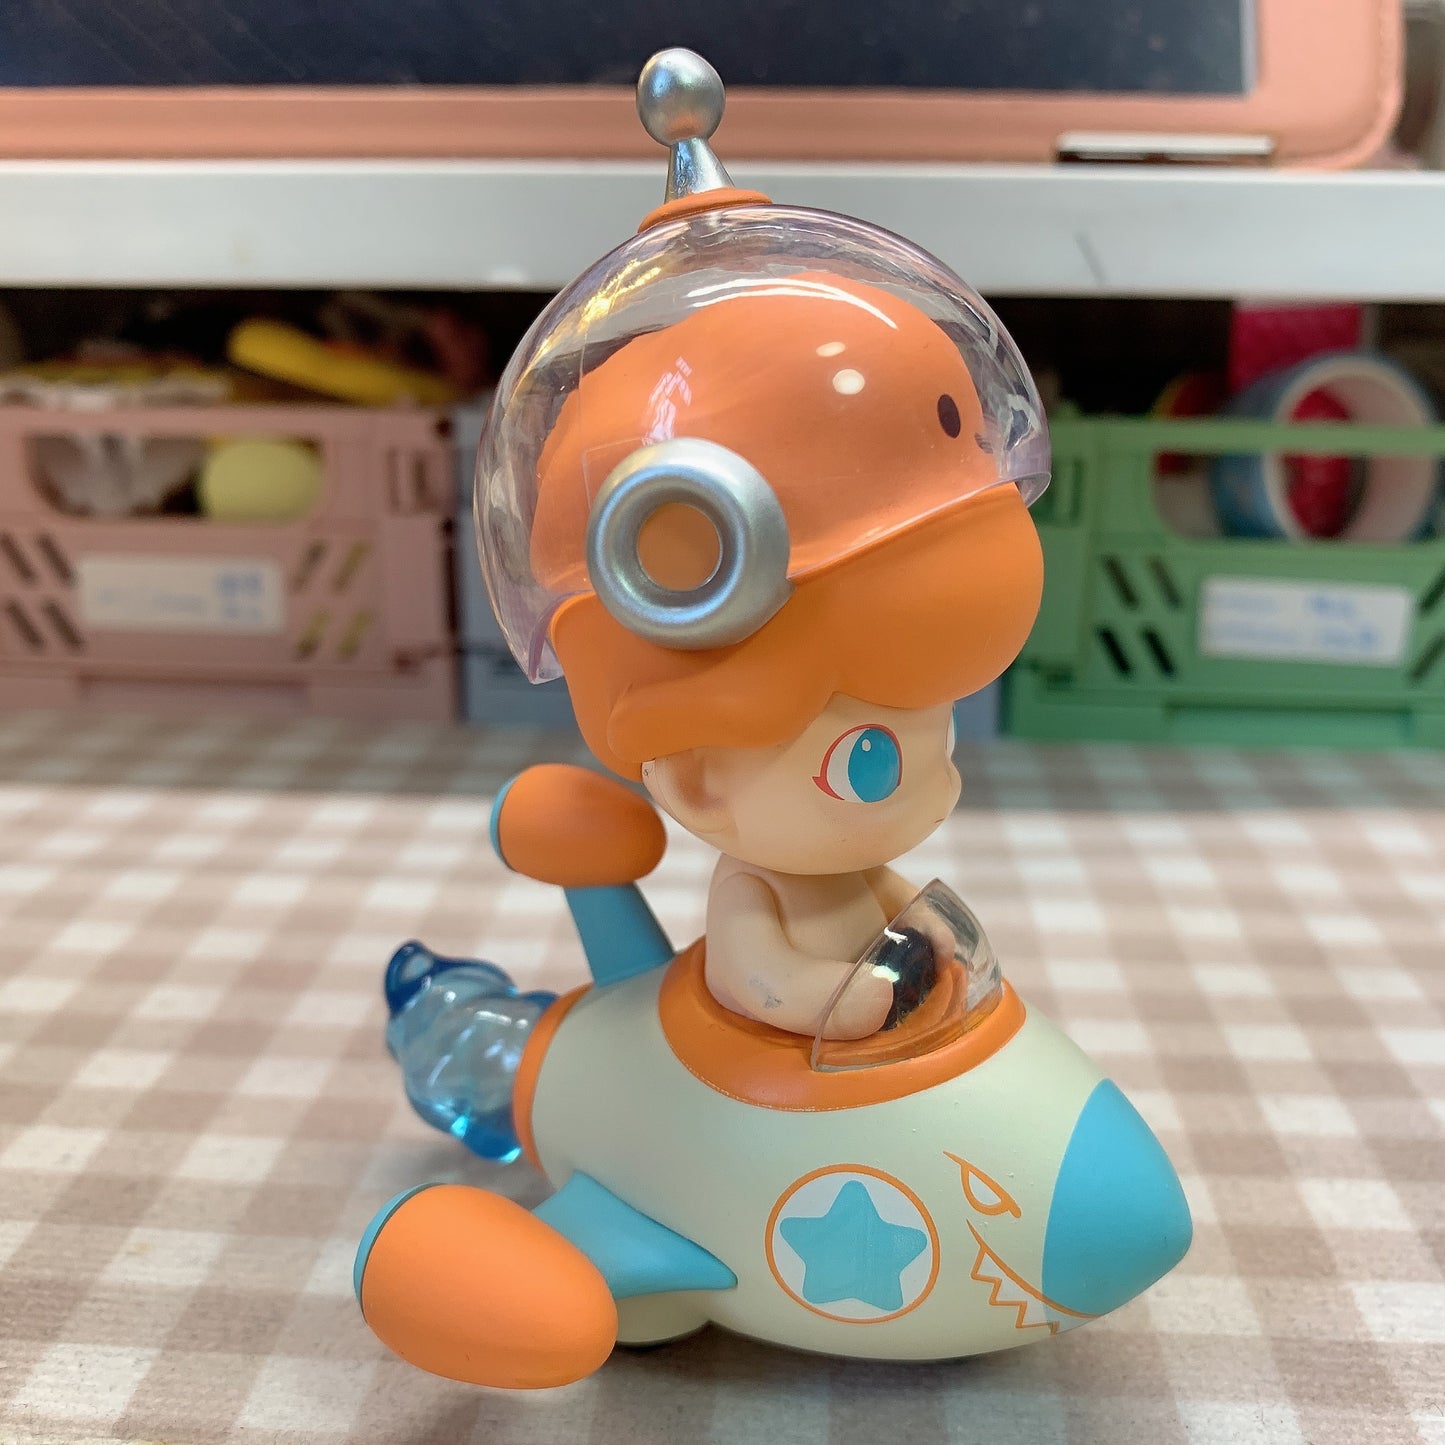 【PRELOVED and SALE 】POPMART Dimoo blind box toy Space Travel series Rocket Boy